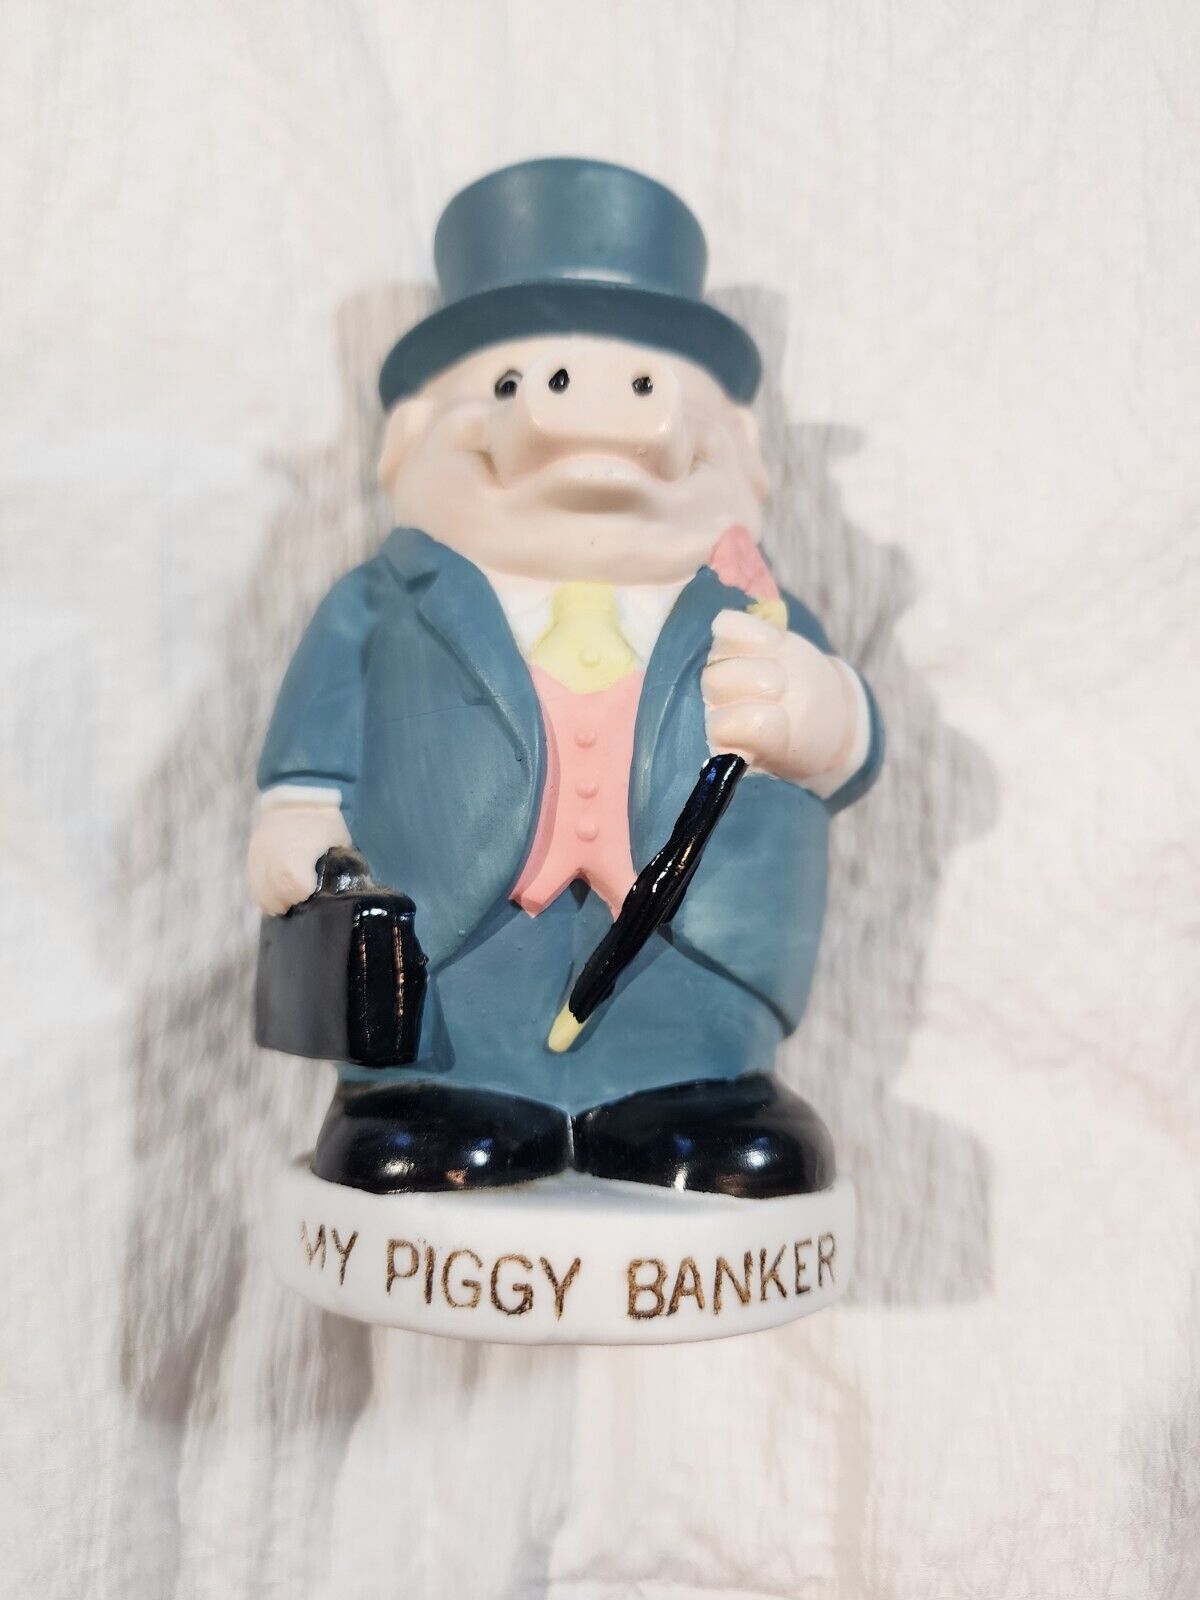 Vintage Piggy Bank Dapper Pig in Blye Suit and Top Hat Made In Taiwan By Reco